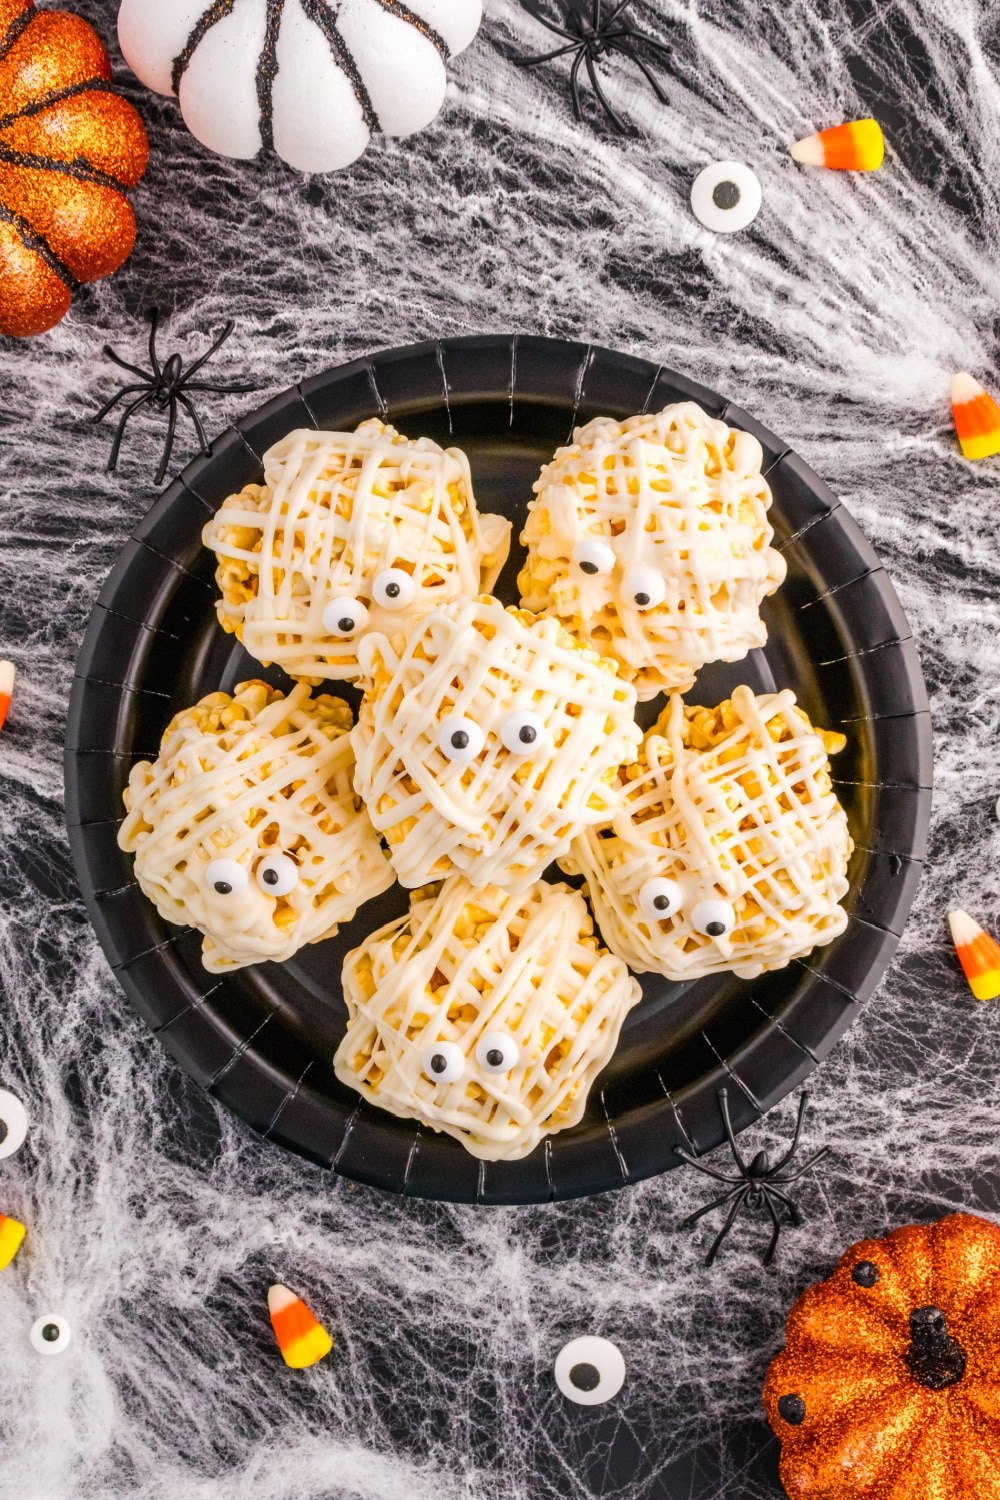 Mummy Popcorn Balls on a black plate sitting on a backdrop of spider webs.